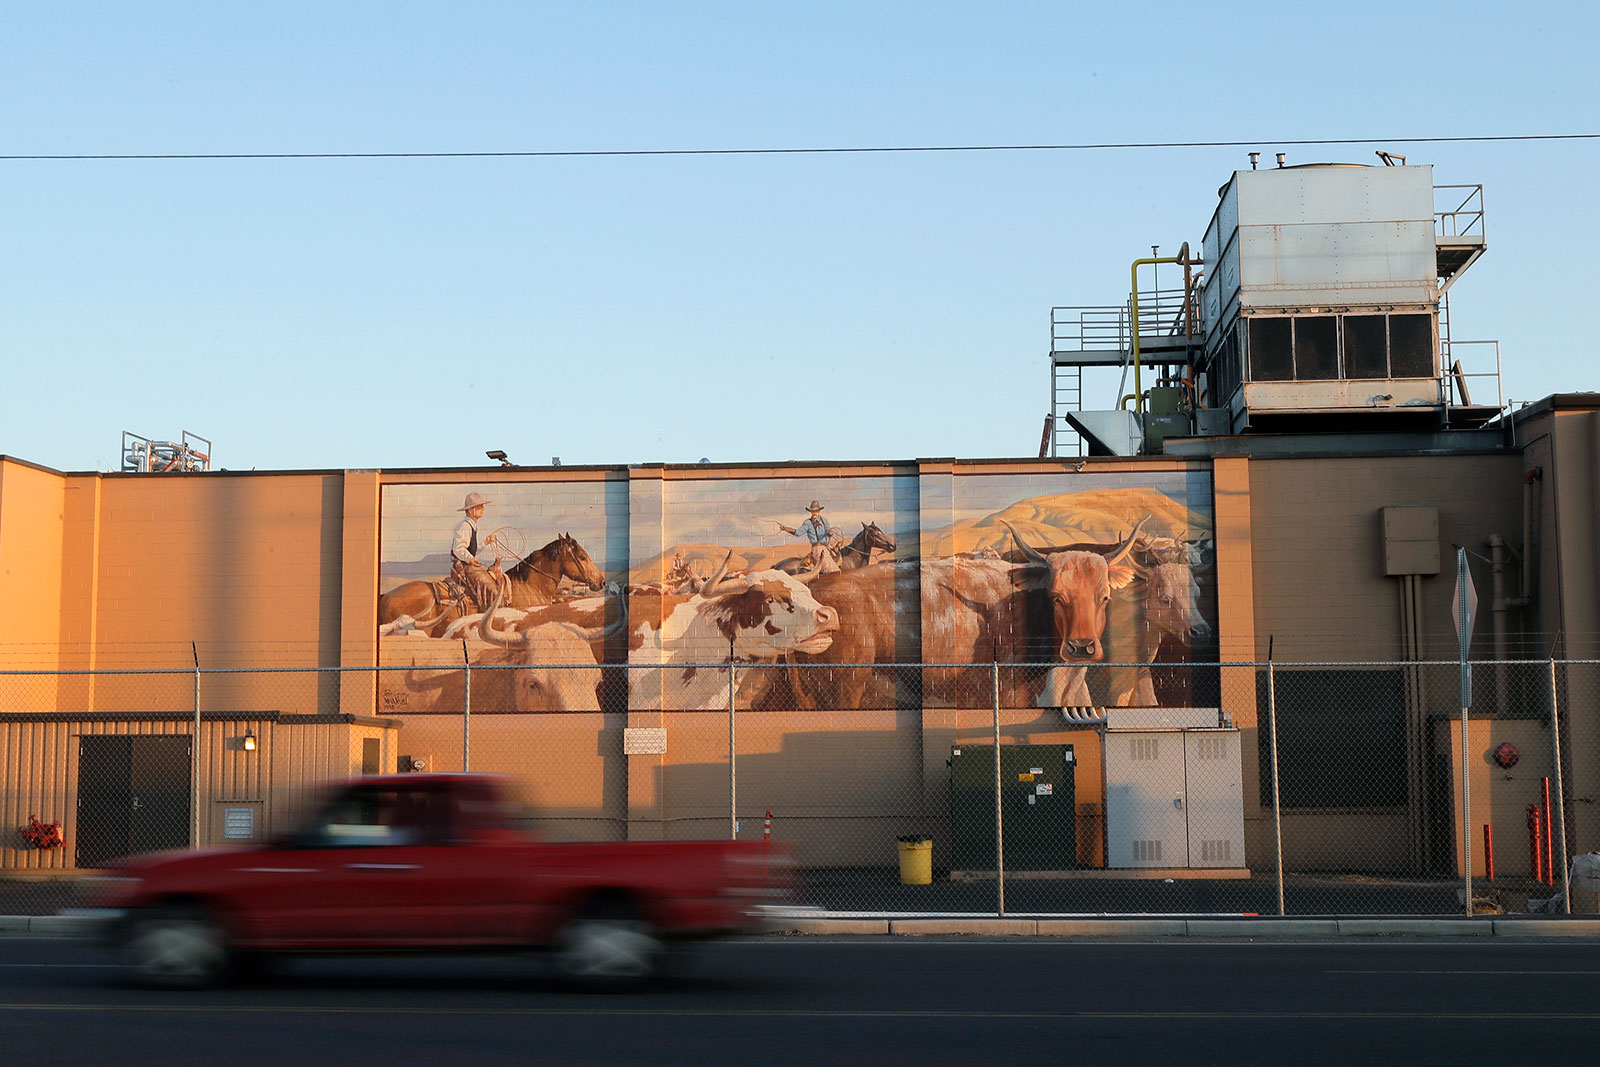 A truck passes by the Agri Beef processing plant in Toppenish, Washington, on Thursday, May 7. Twenty state attorneys general sent a letter to the White House Tuesday asking for "immediate action to ensure the safety of these essential workers" at meat and poultry plants across the country. 